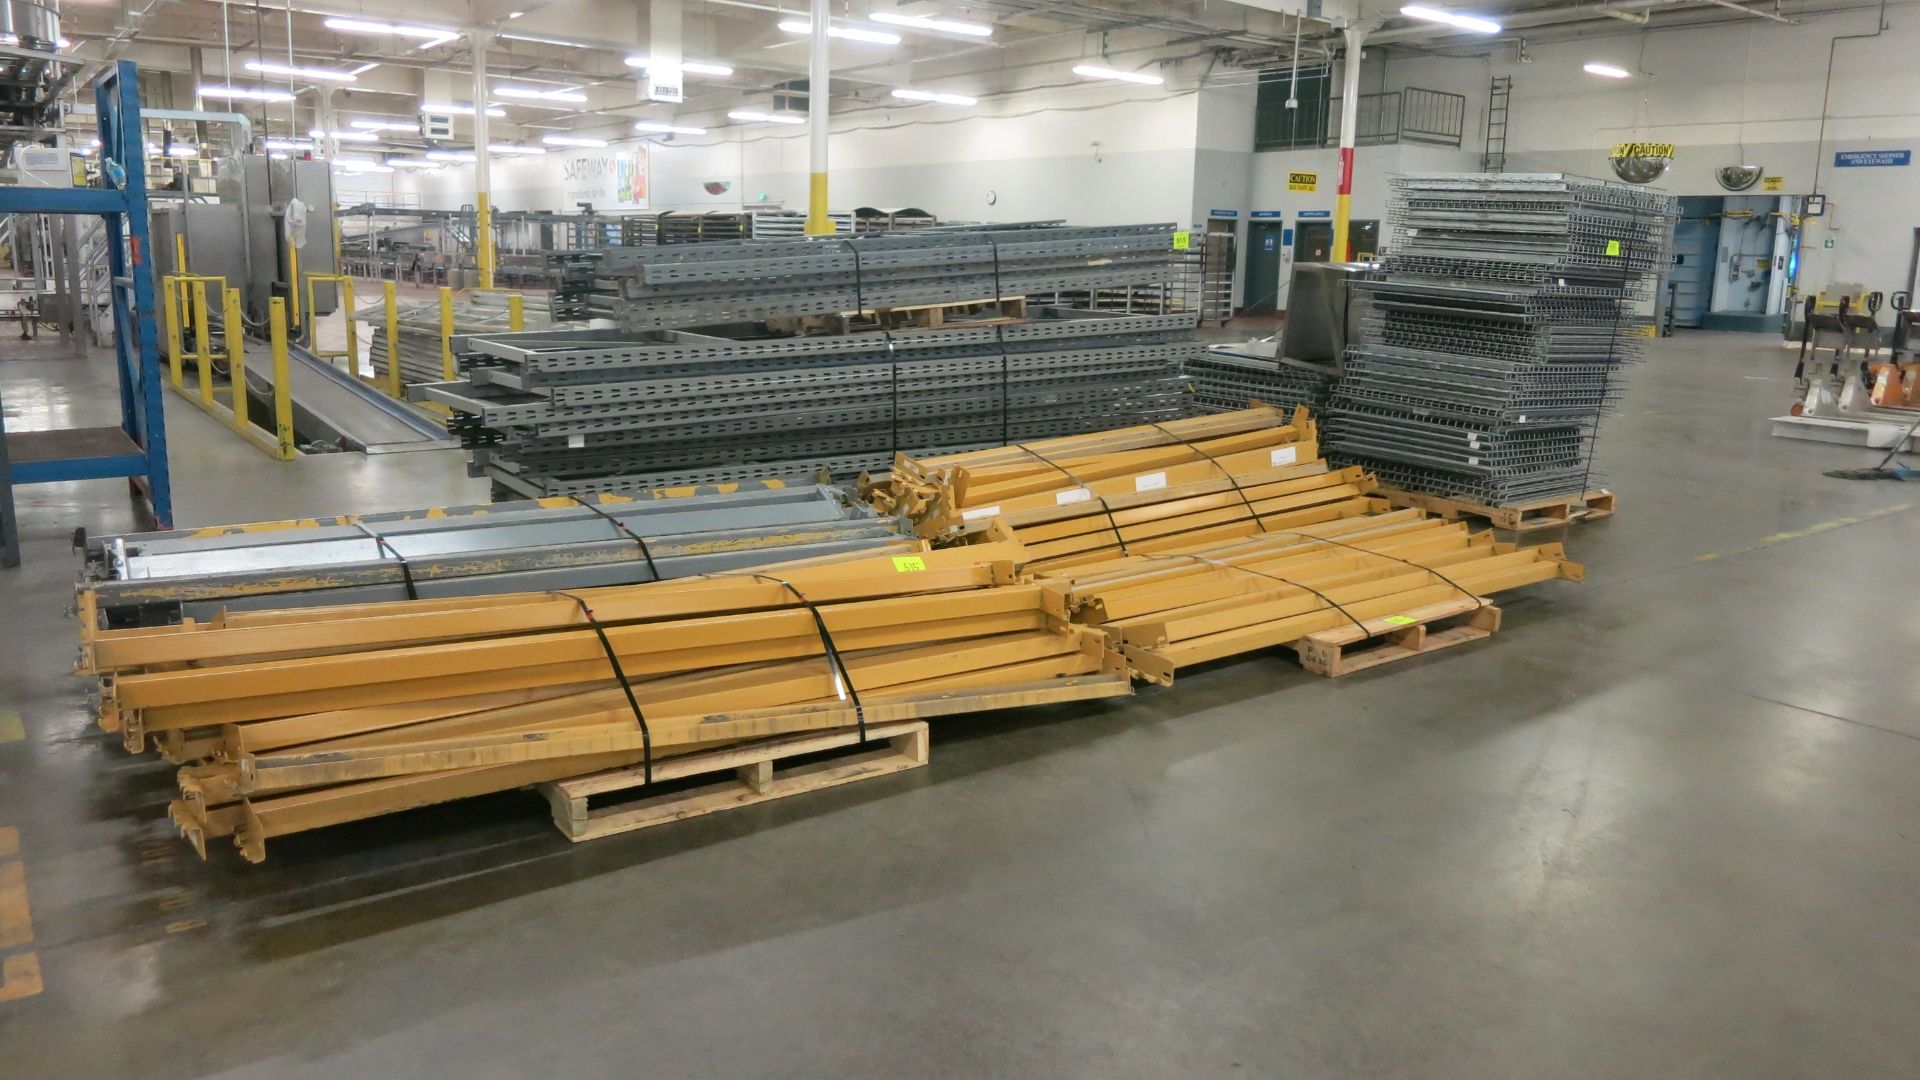 [Lot] 16-Sections pallet racks, with (13) uprights x 12', (5) uprights x 10', (55) cross beams x